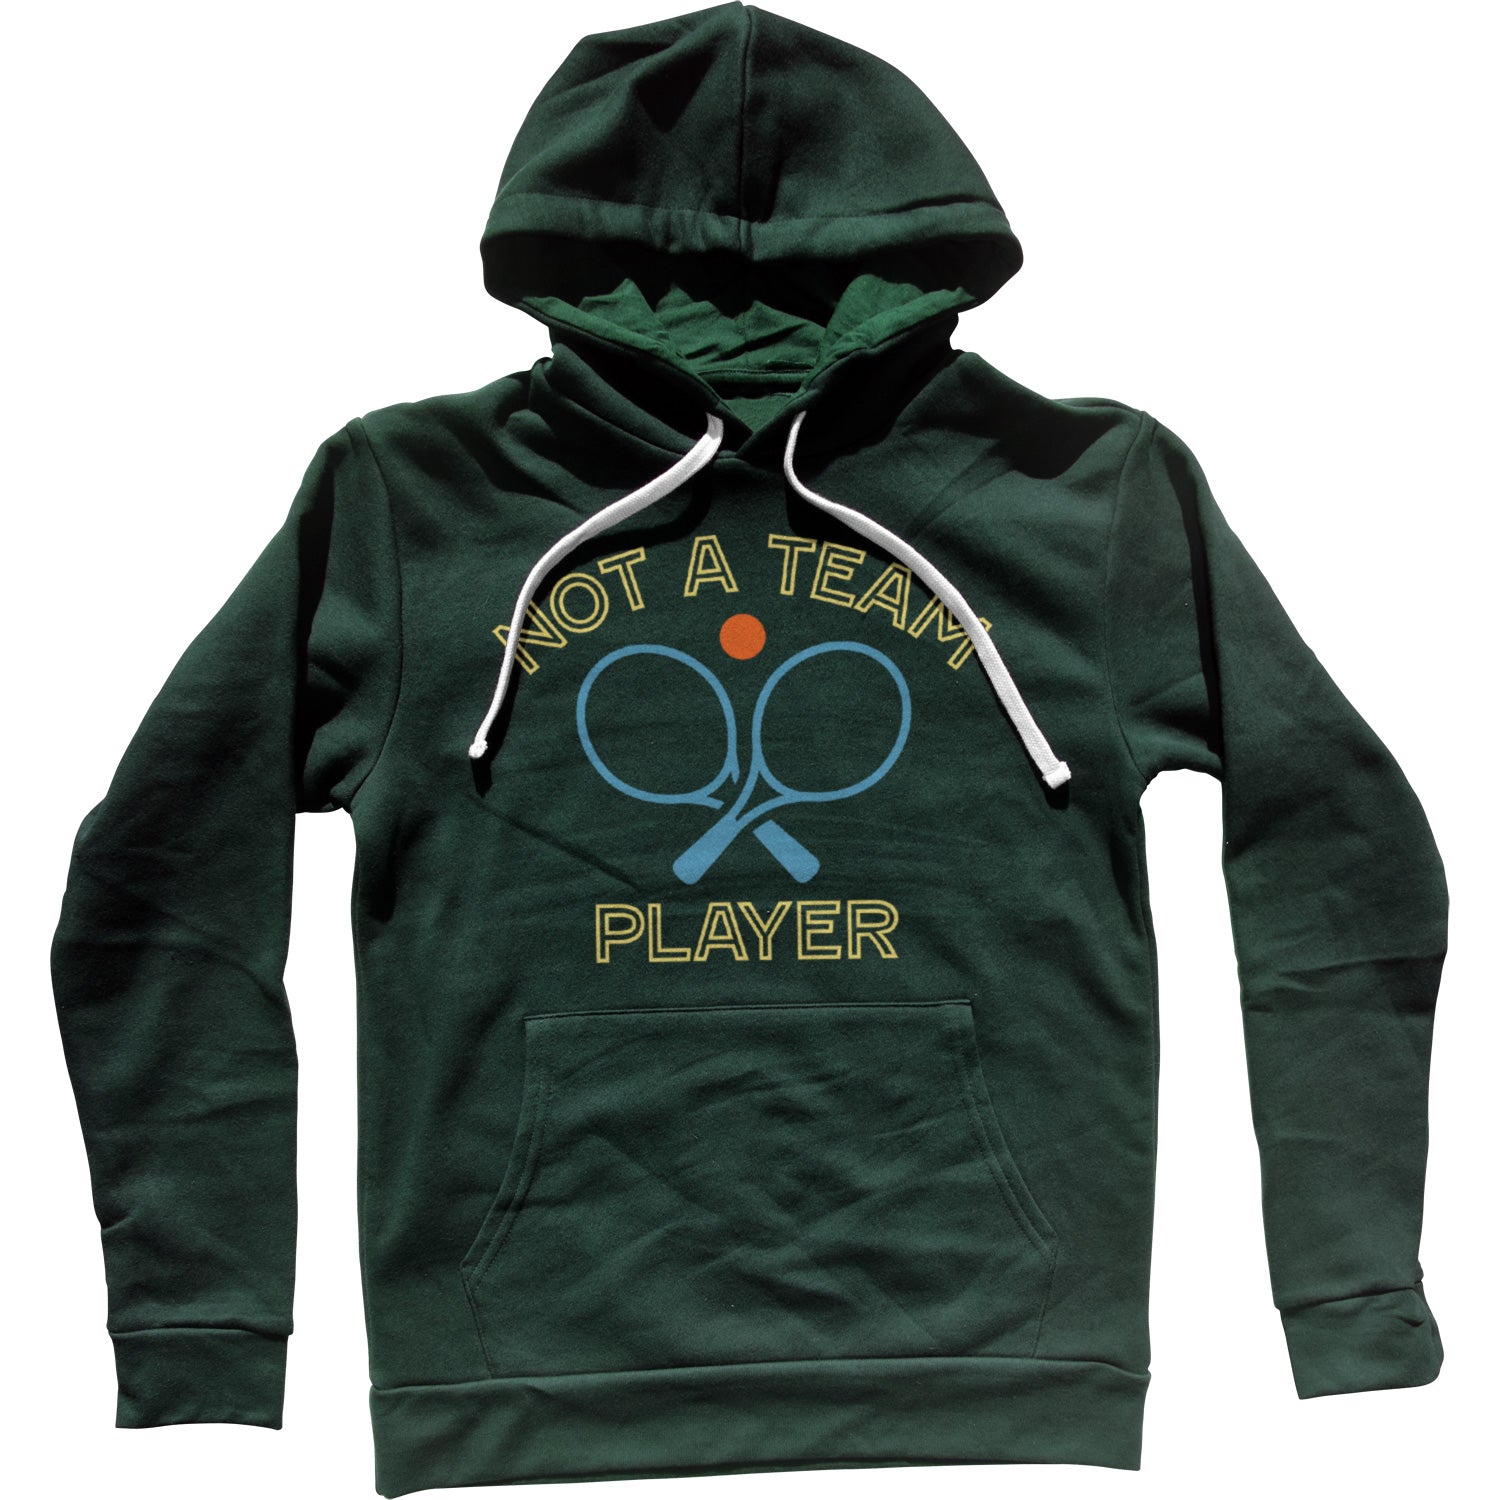 Not a Team Player Unisex Hoodie